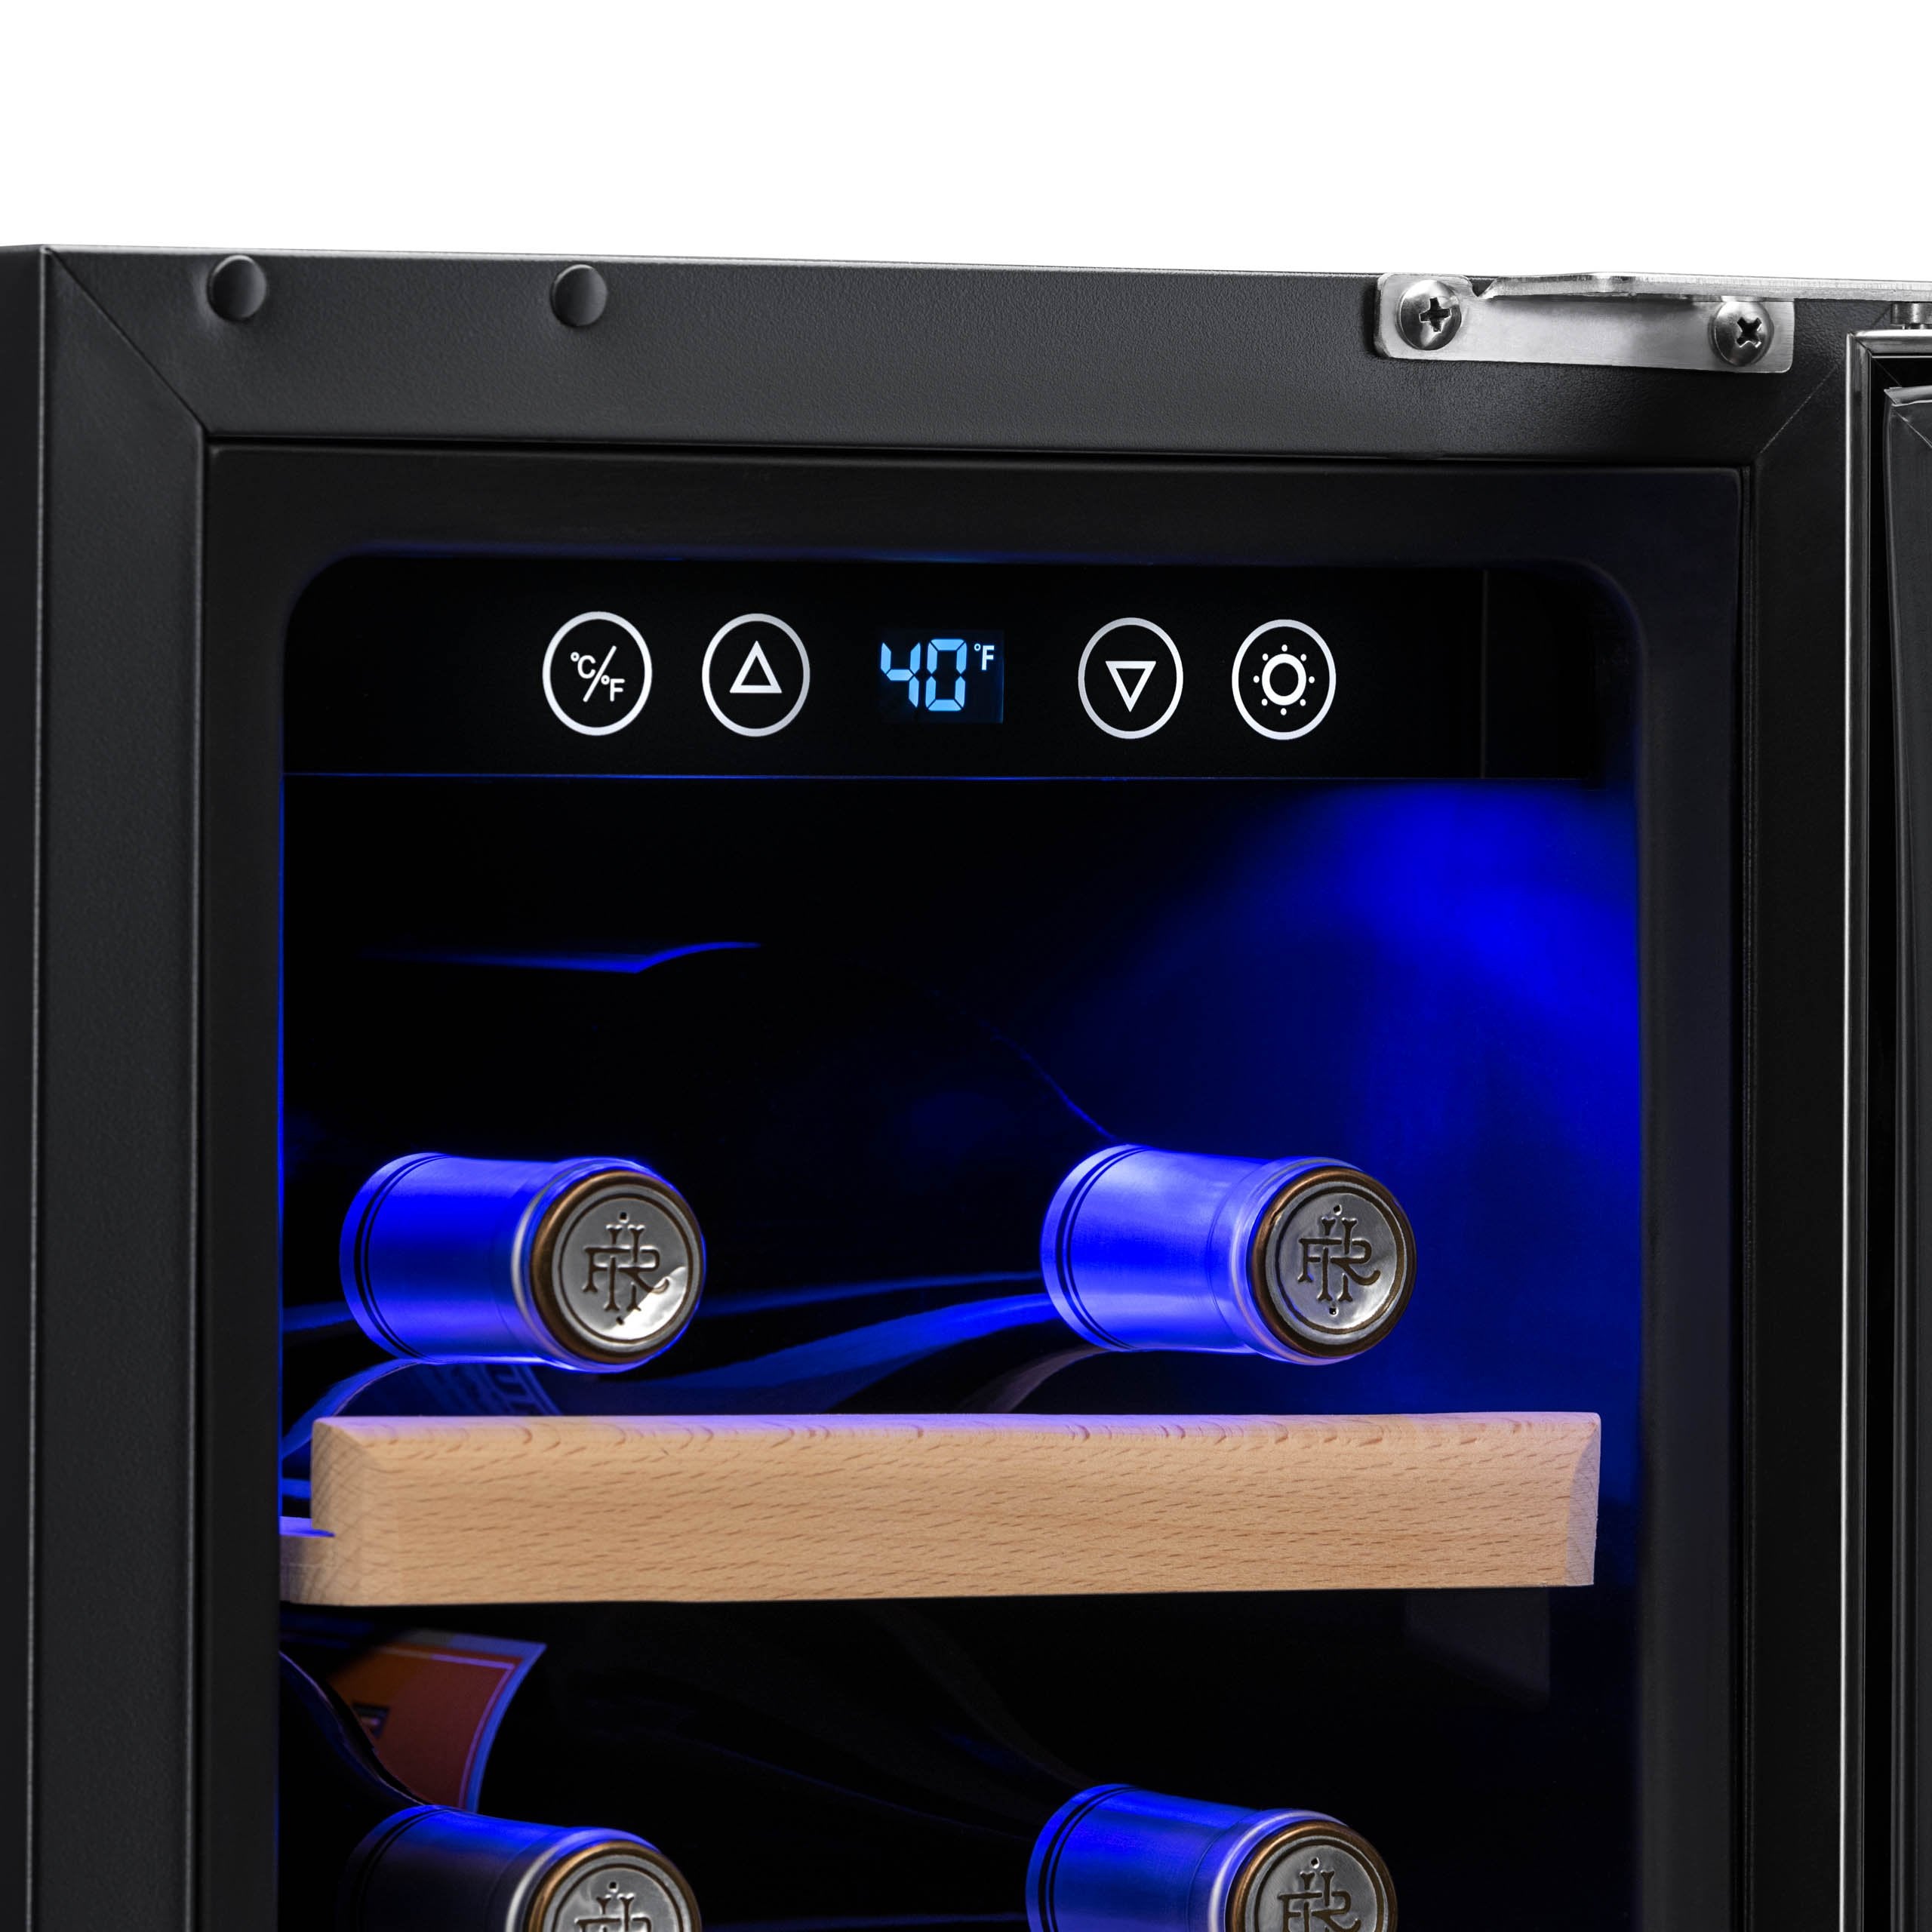 NewAir 12" Built-In 19 Bottle Compressor Wine Fridge Lighting and Temperature Control Button